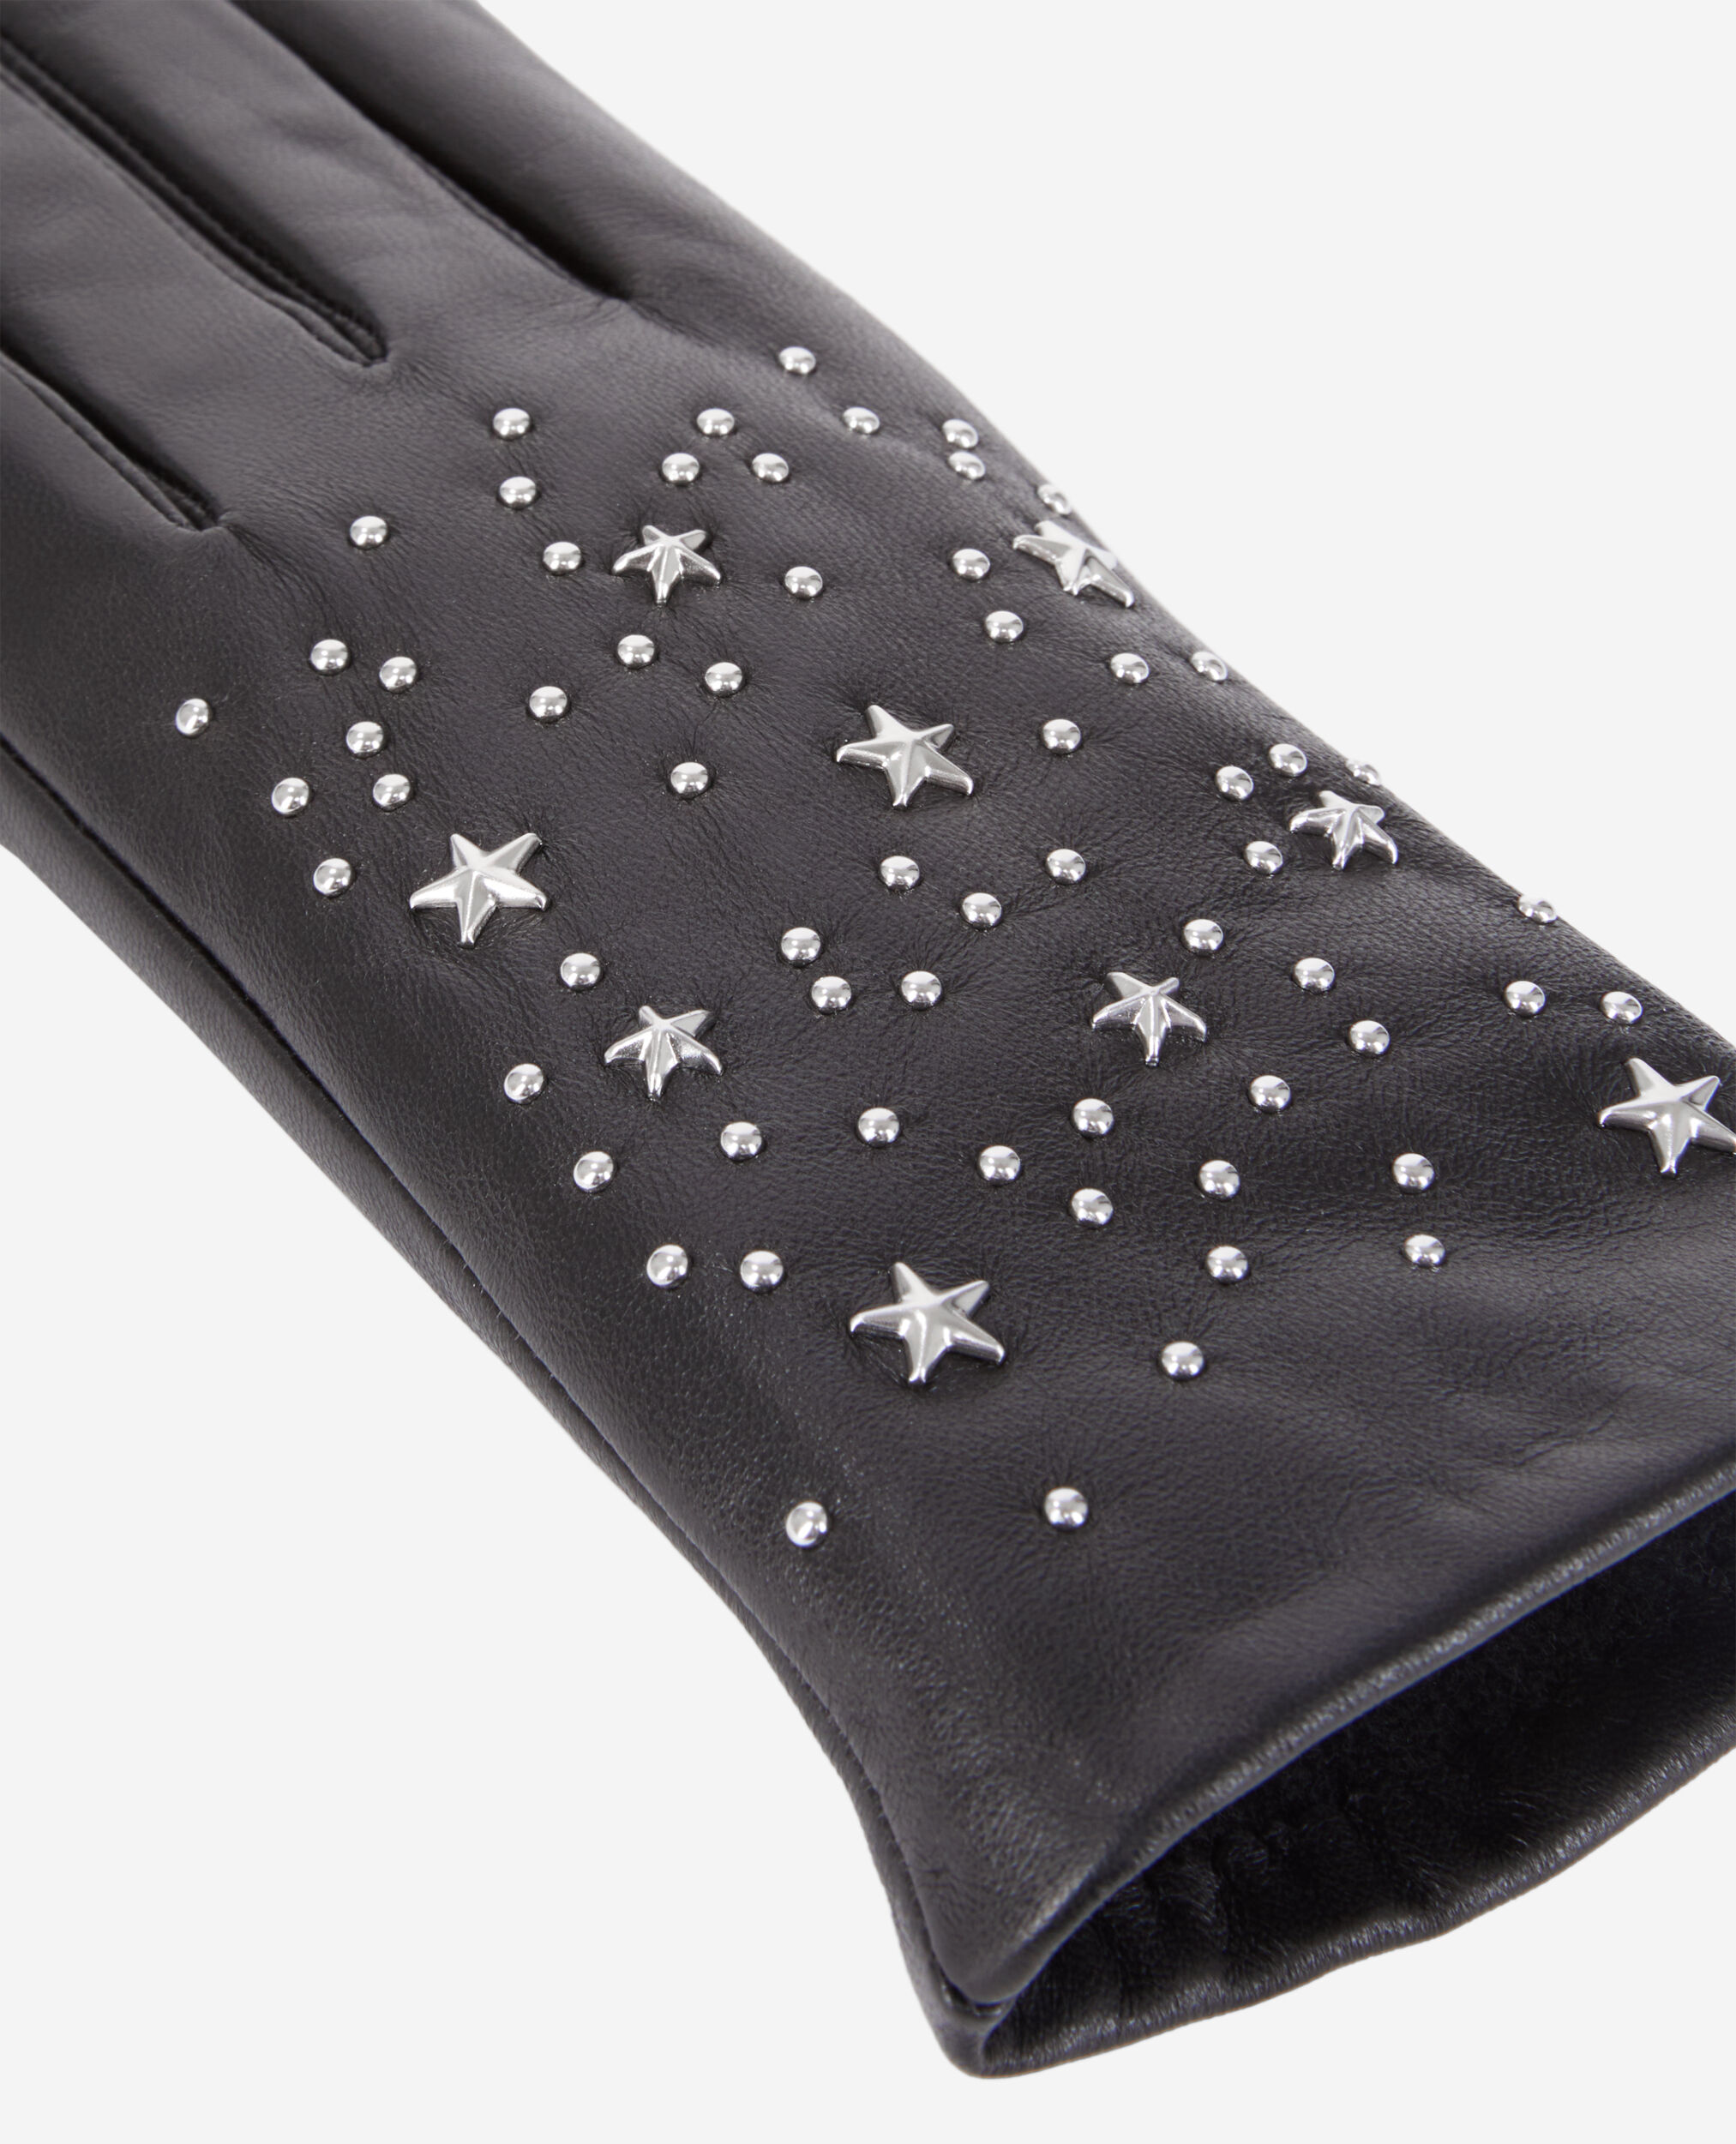 Women's black leather gloves with stars, BLACK, hi-res image number null